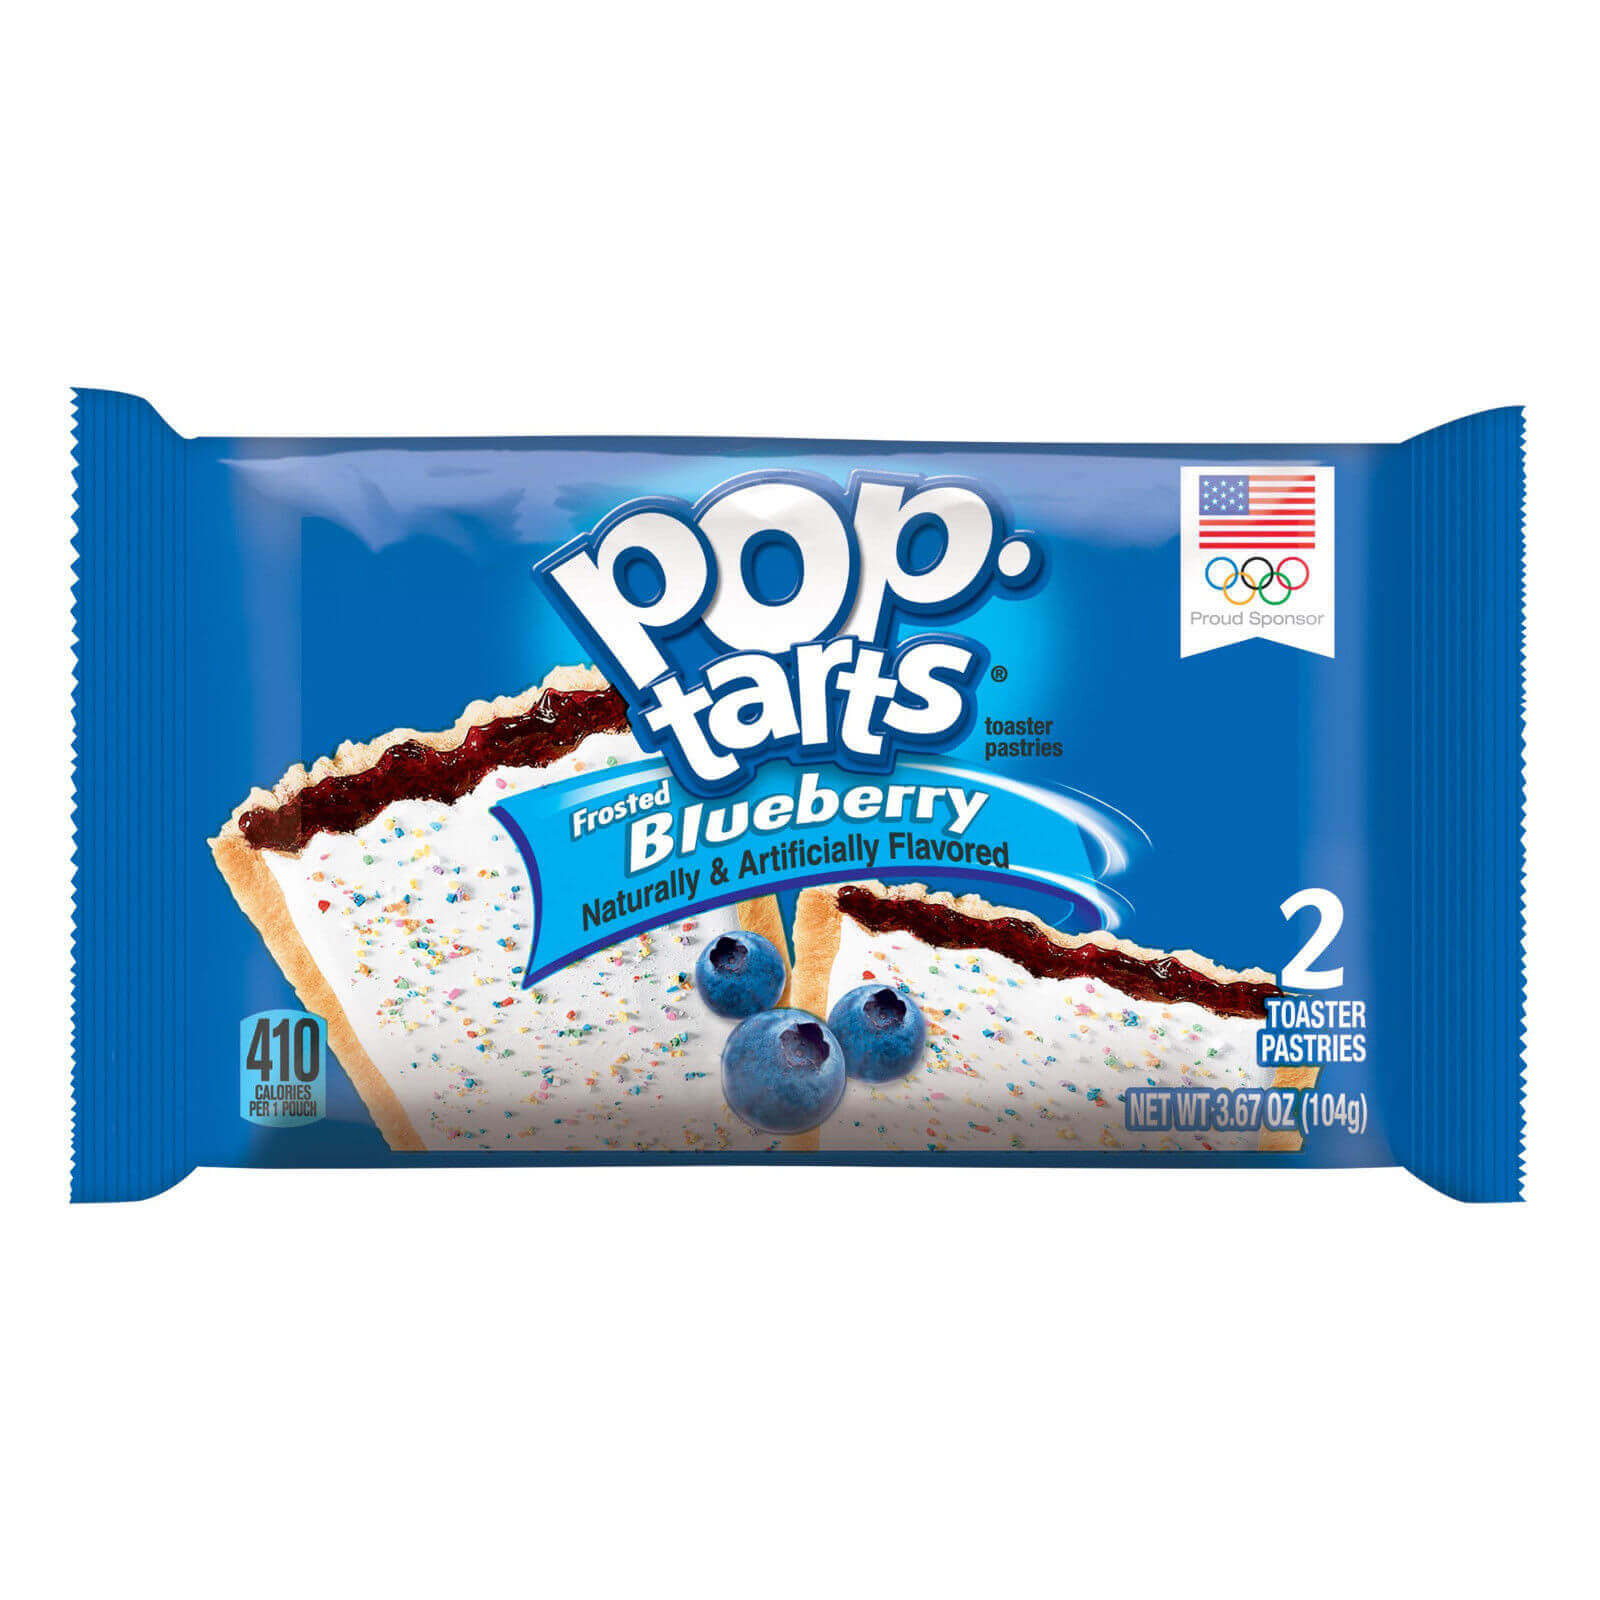 Kelloggs Pop-Tarts 2-pack Frosted Blueberry